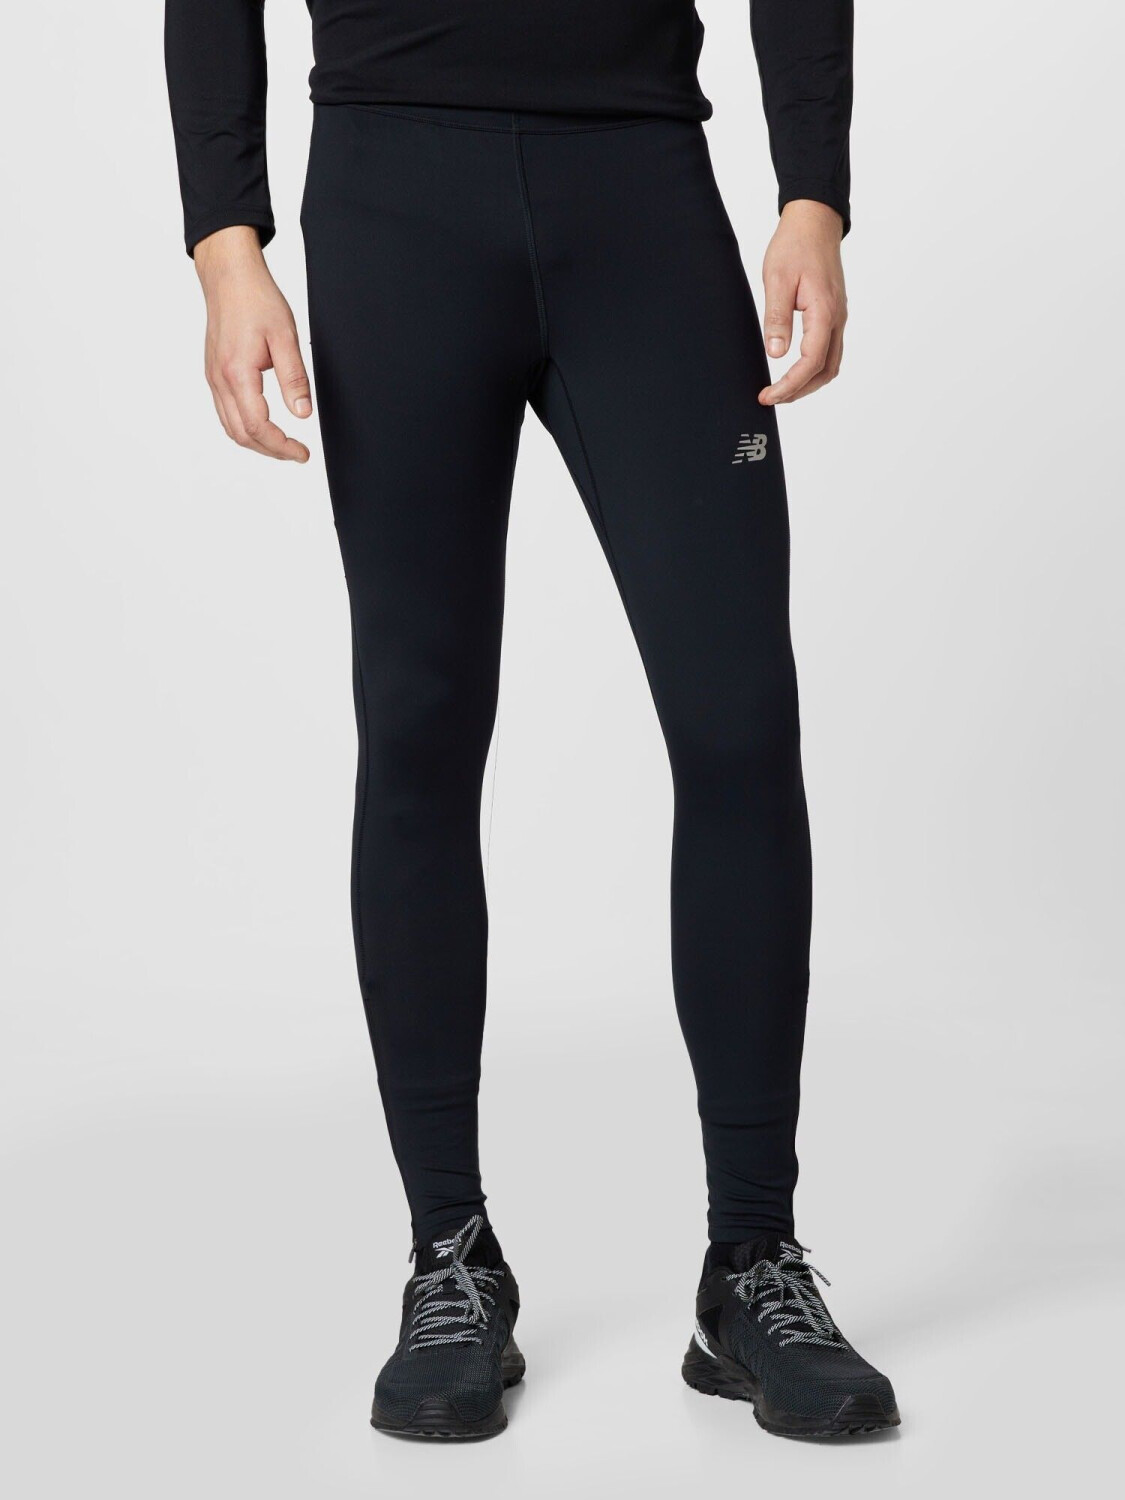 New Balance® for J.Crew compression tights | Gym outfit men, Crossfit  clothes, Mens outfits